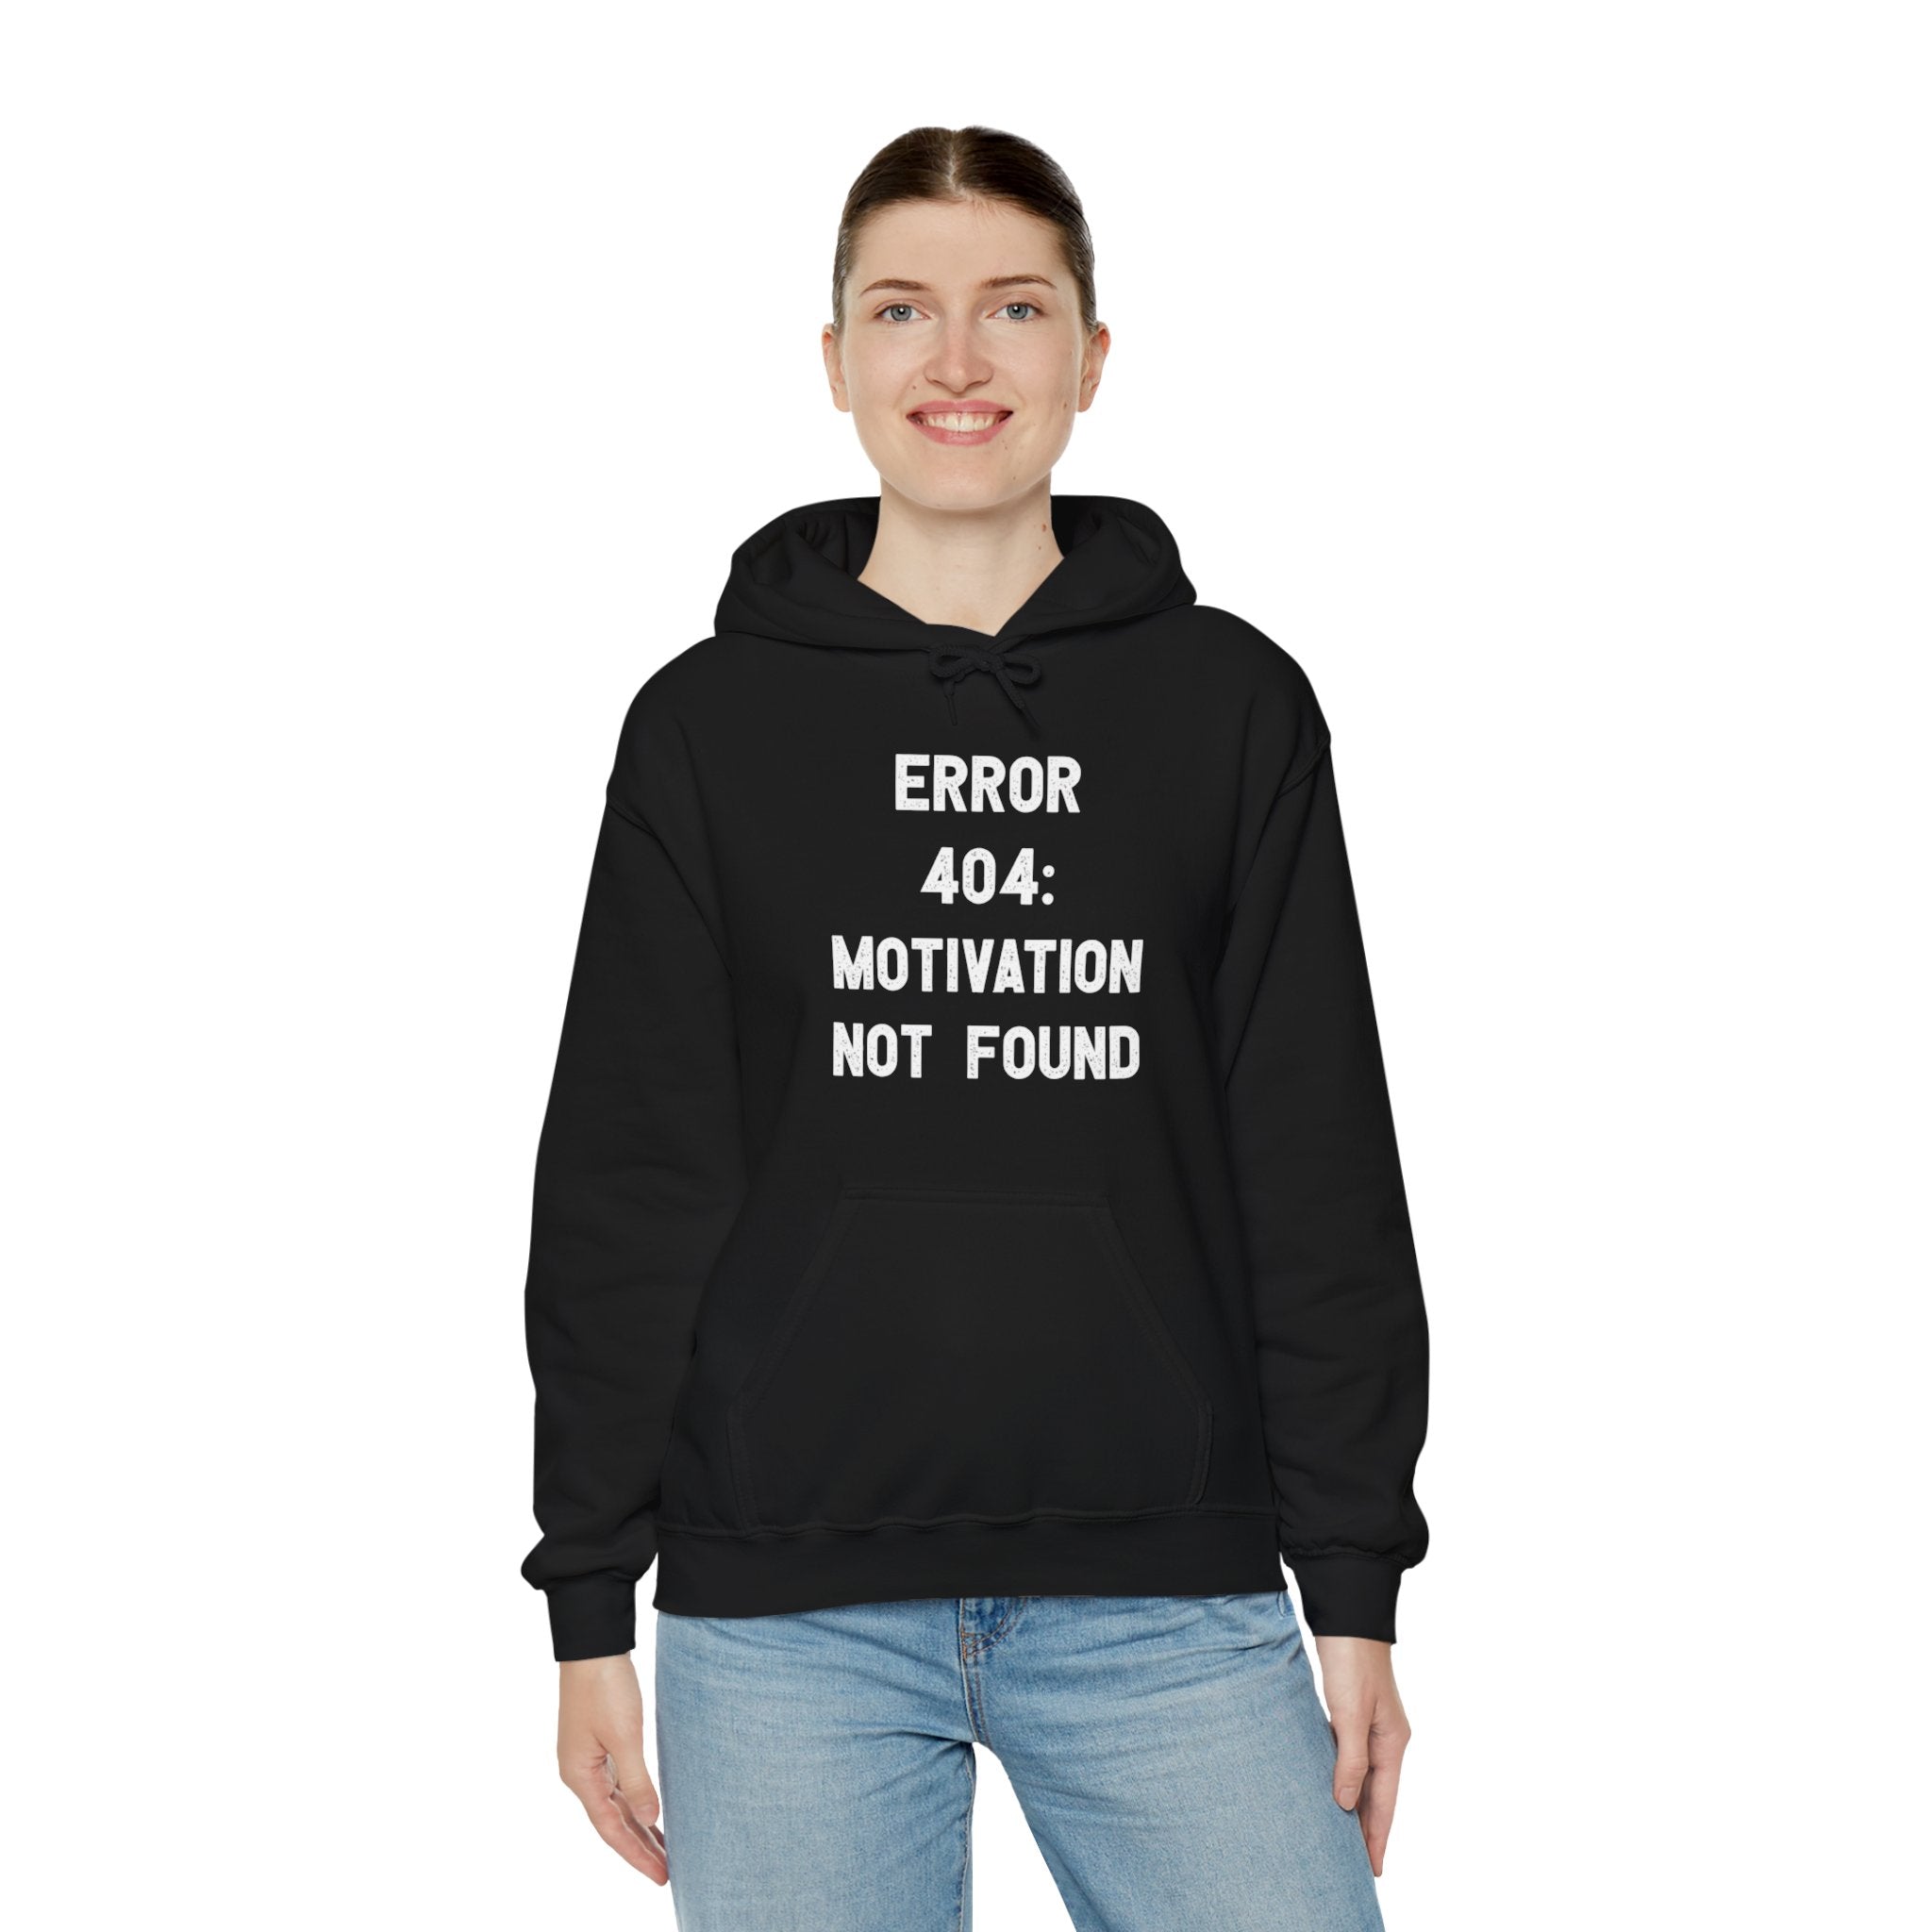 A person wearing an Error 404: Motivation not found - Hooded Sweatshirt stands against a white background, smiling with hands in pockets.